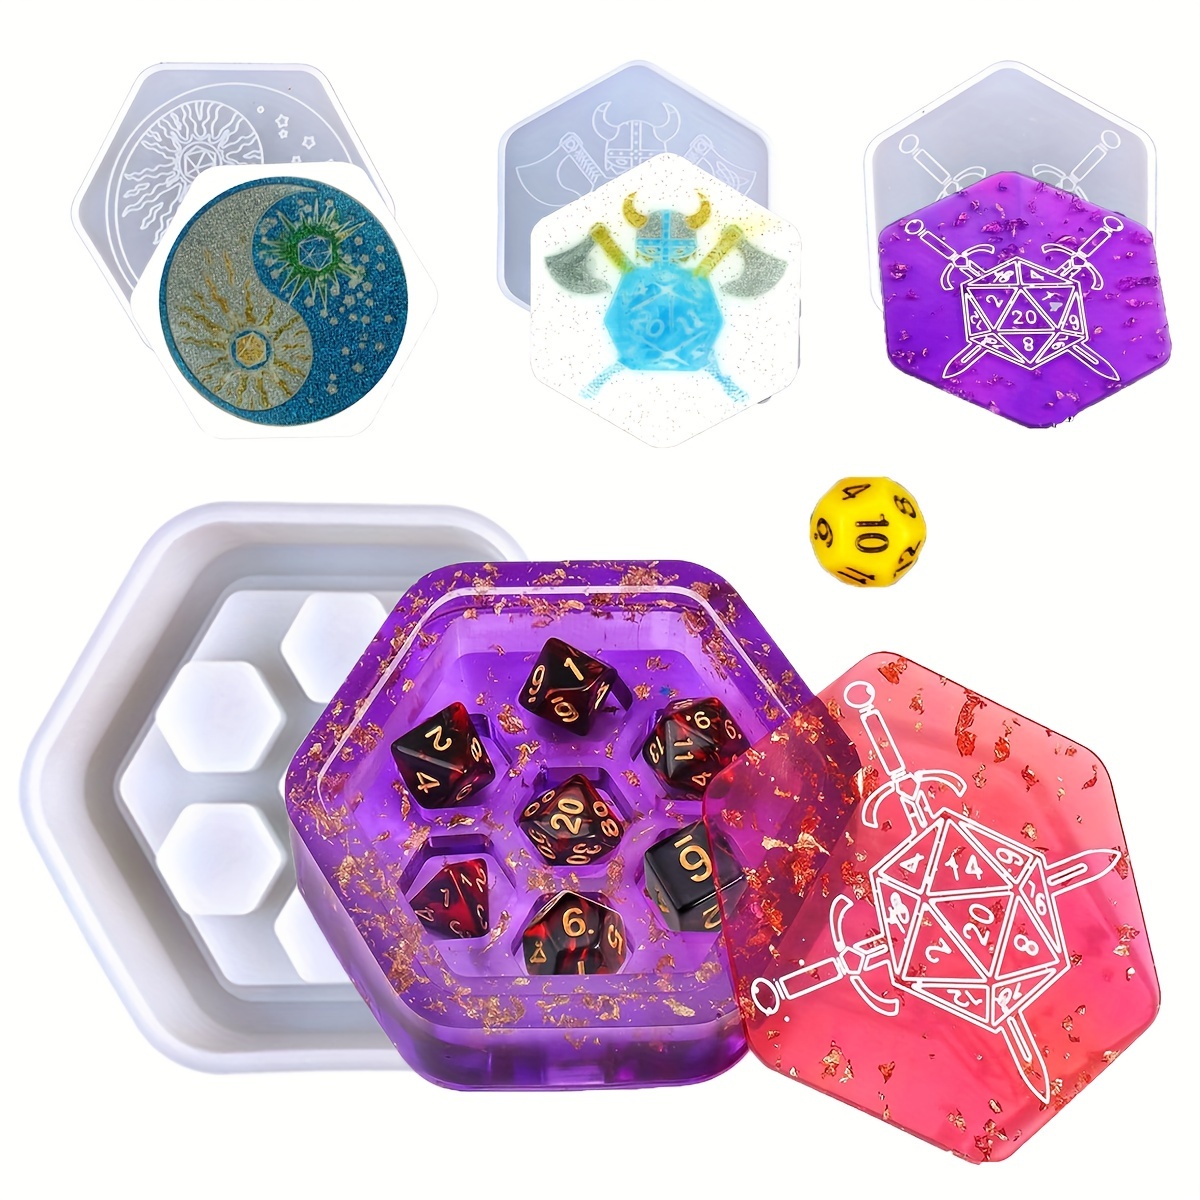 LET'S Resin Dice Box Mold for DND Dices, Silicone Box Molds for Polyhedral  Dices Set,resin Dice Case Making, DIY Gift for Dice Lovers 